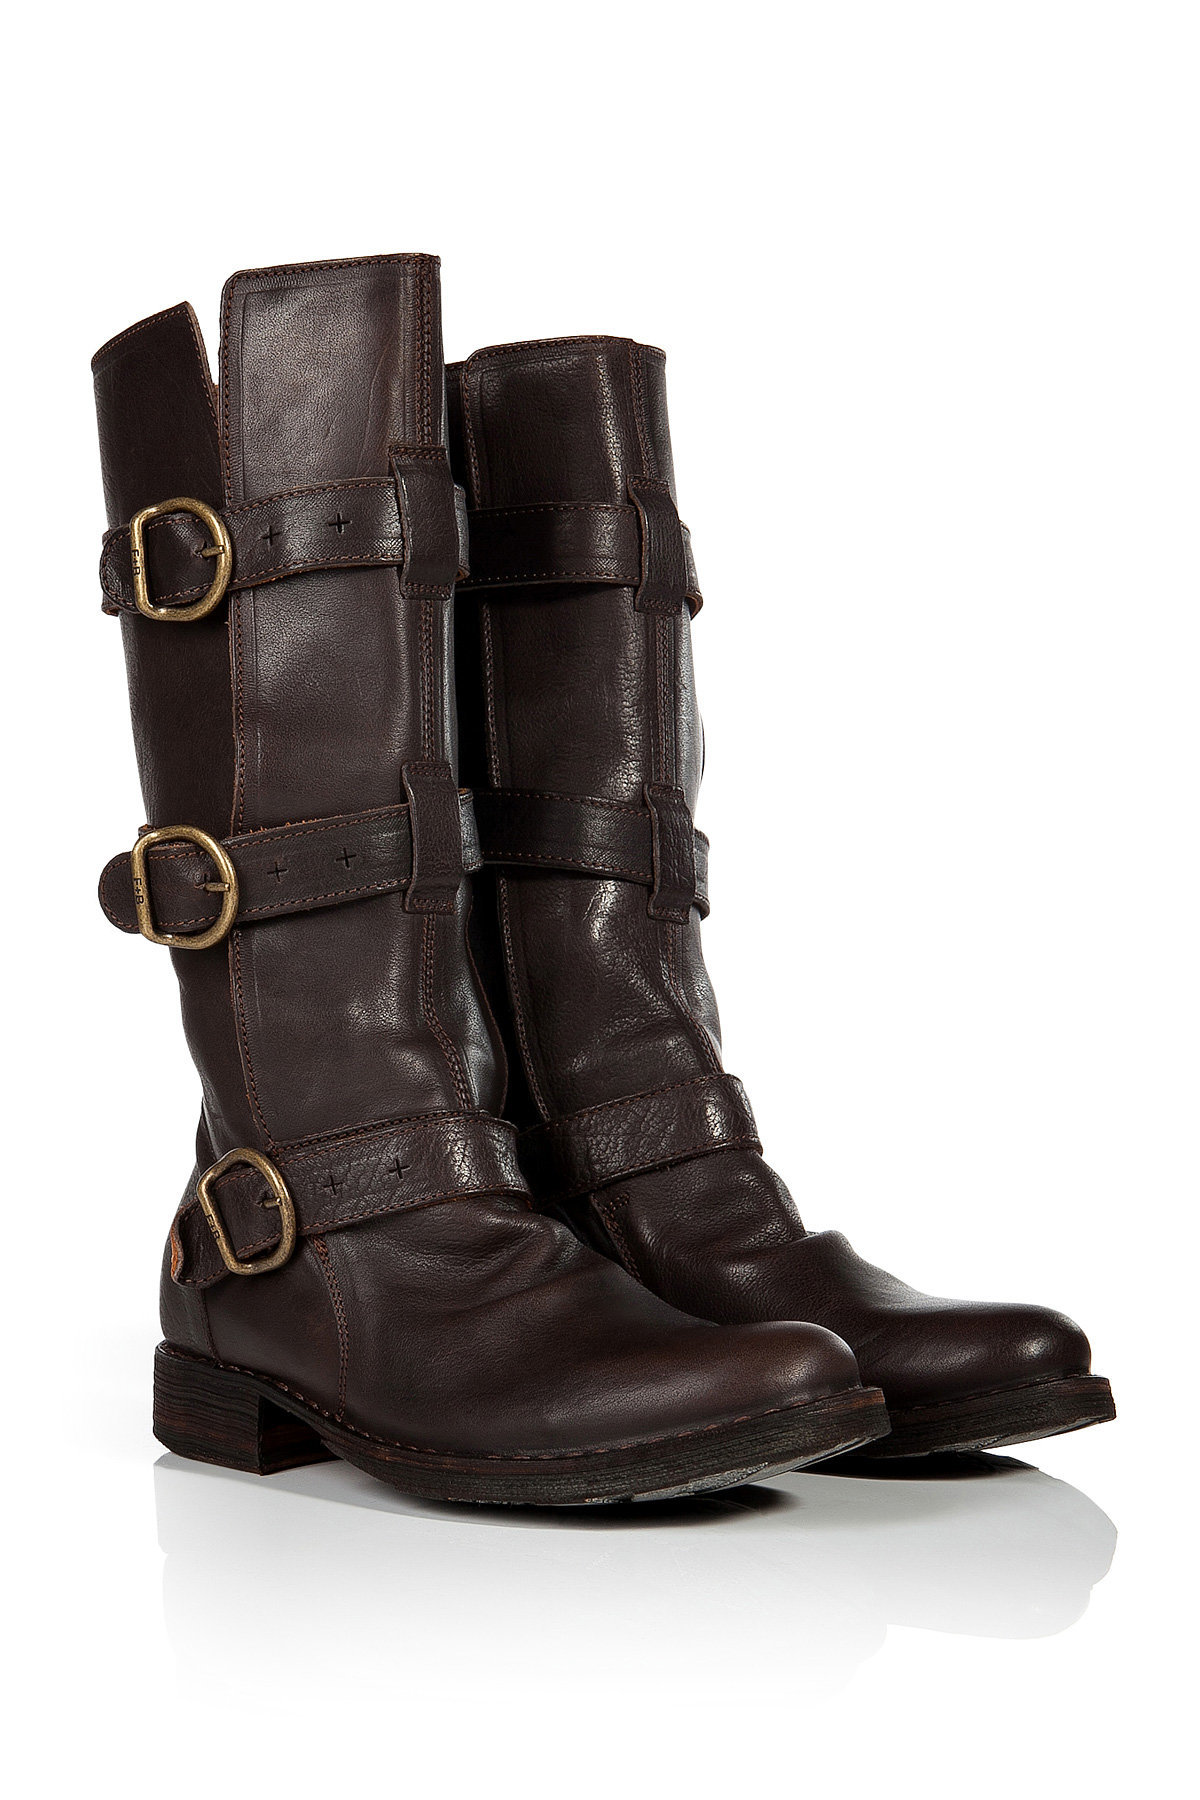 Fiorentini + Baker - Leather Buckled Boots